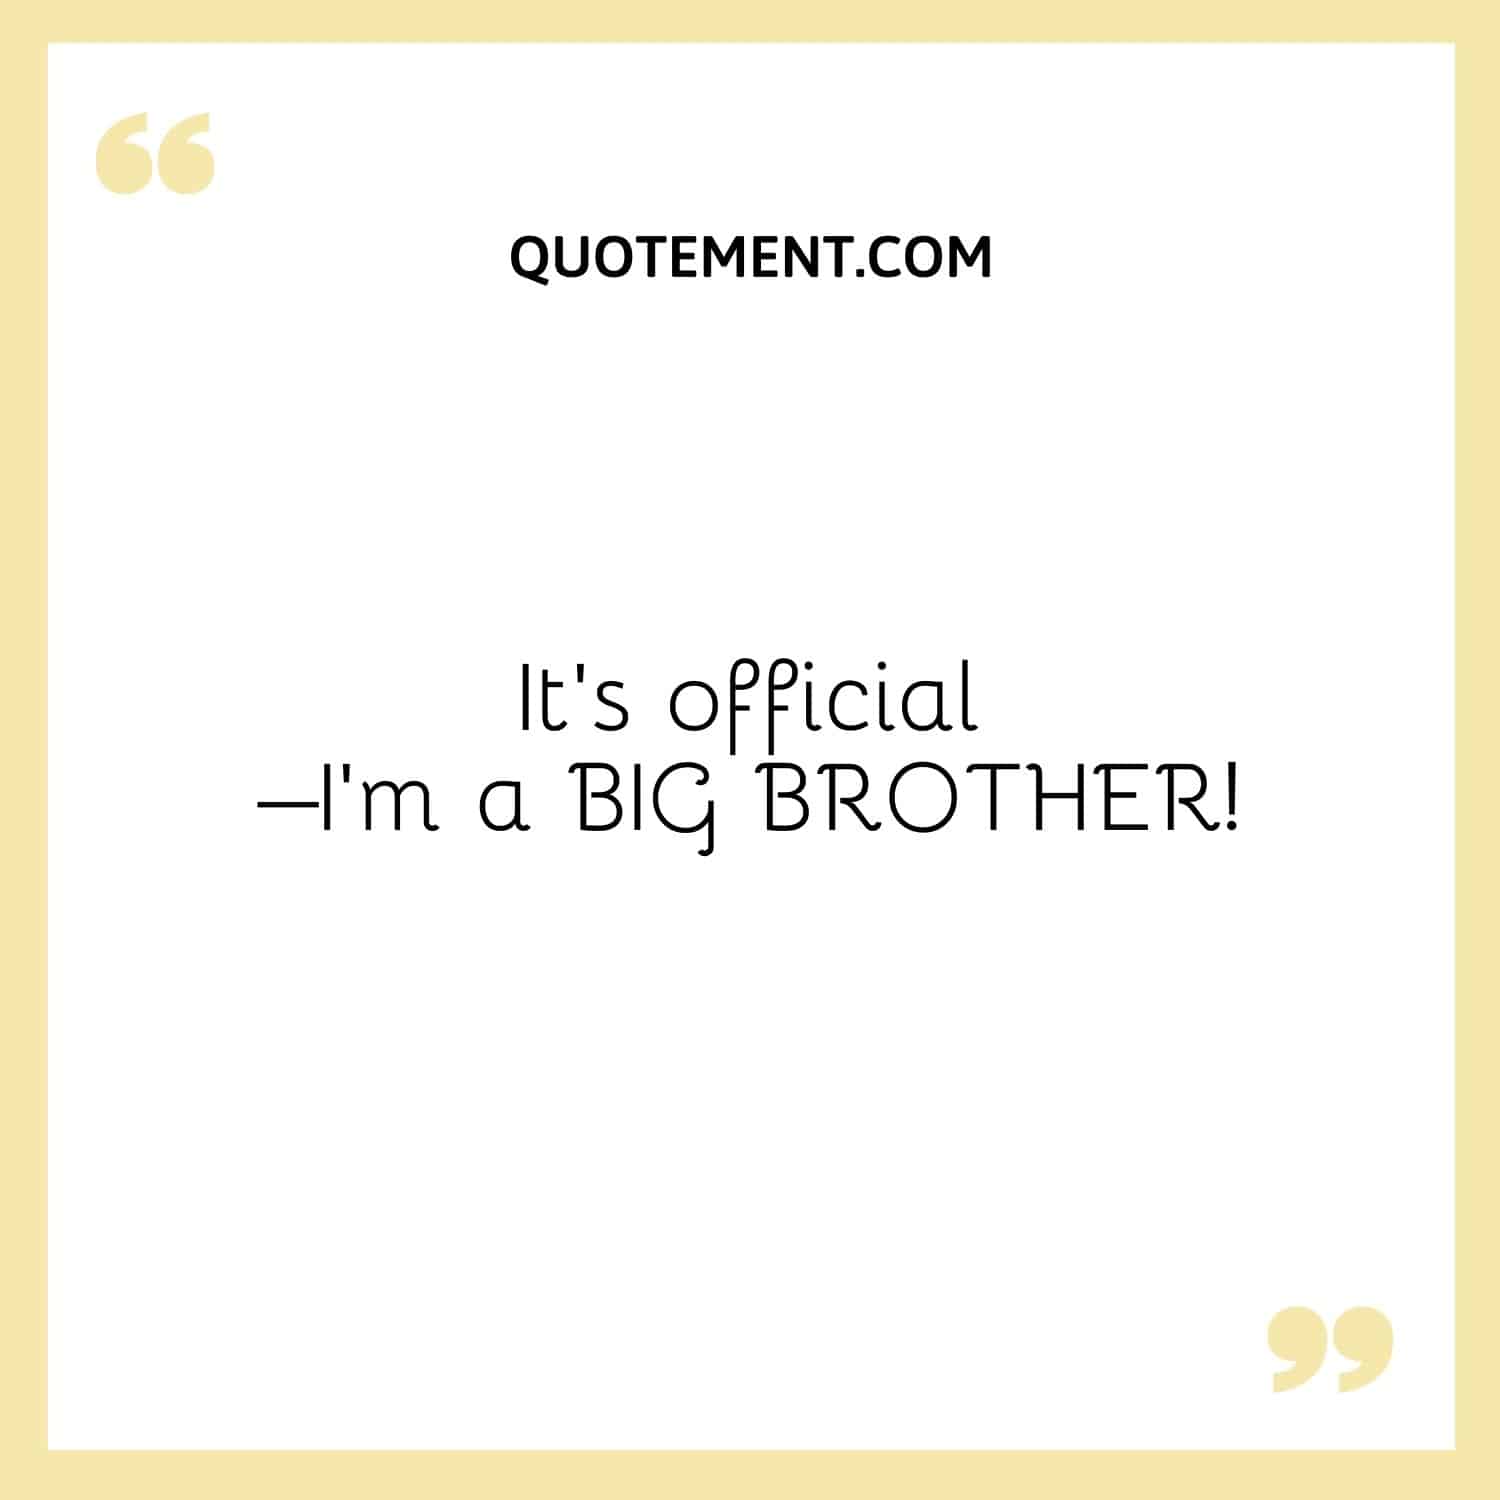 It's official–I'm a BIG BROTHER!